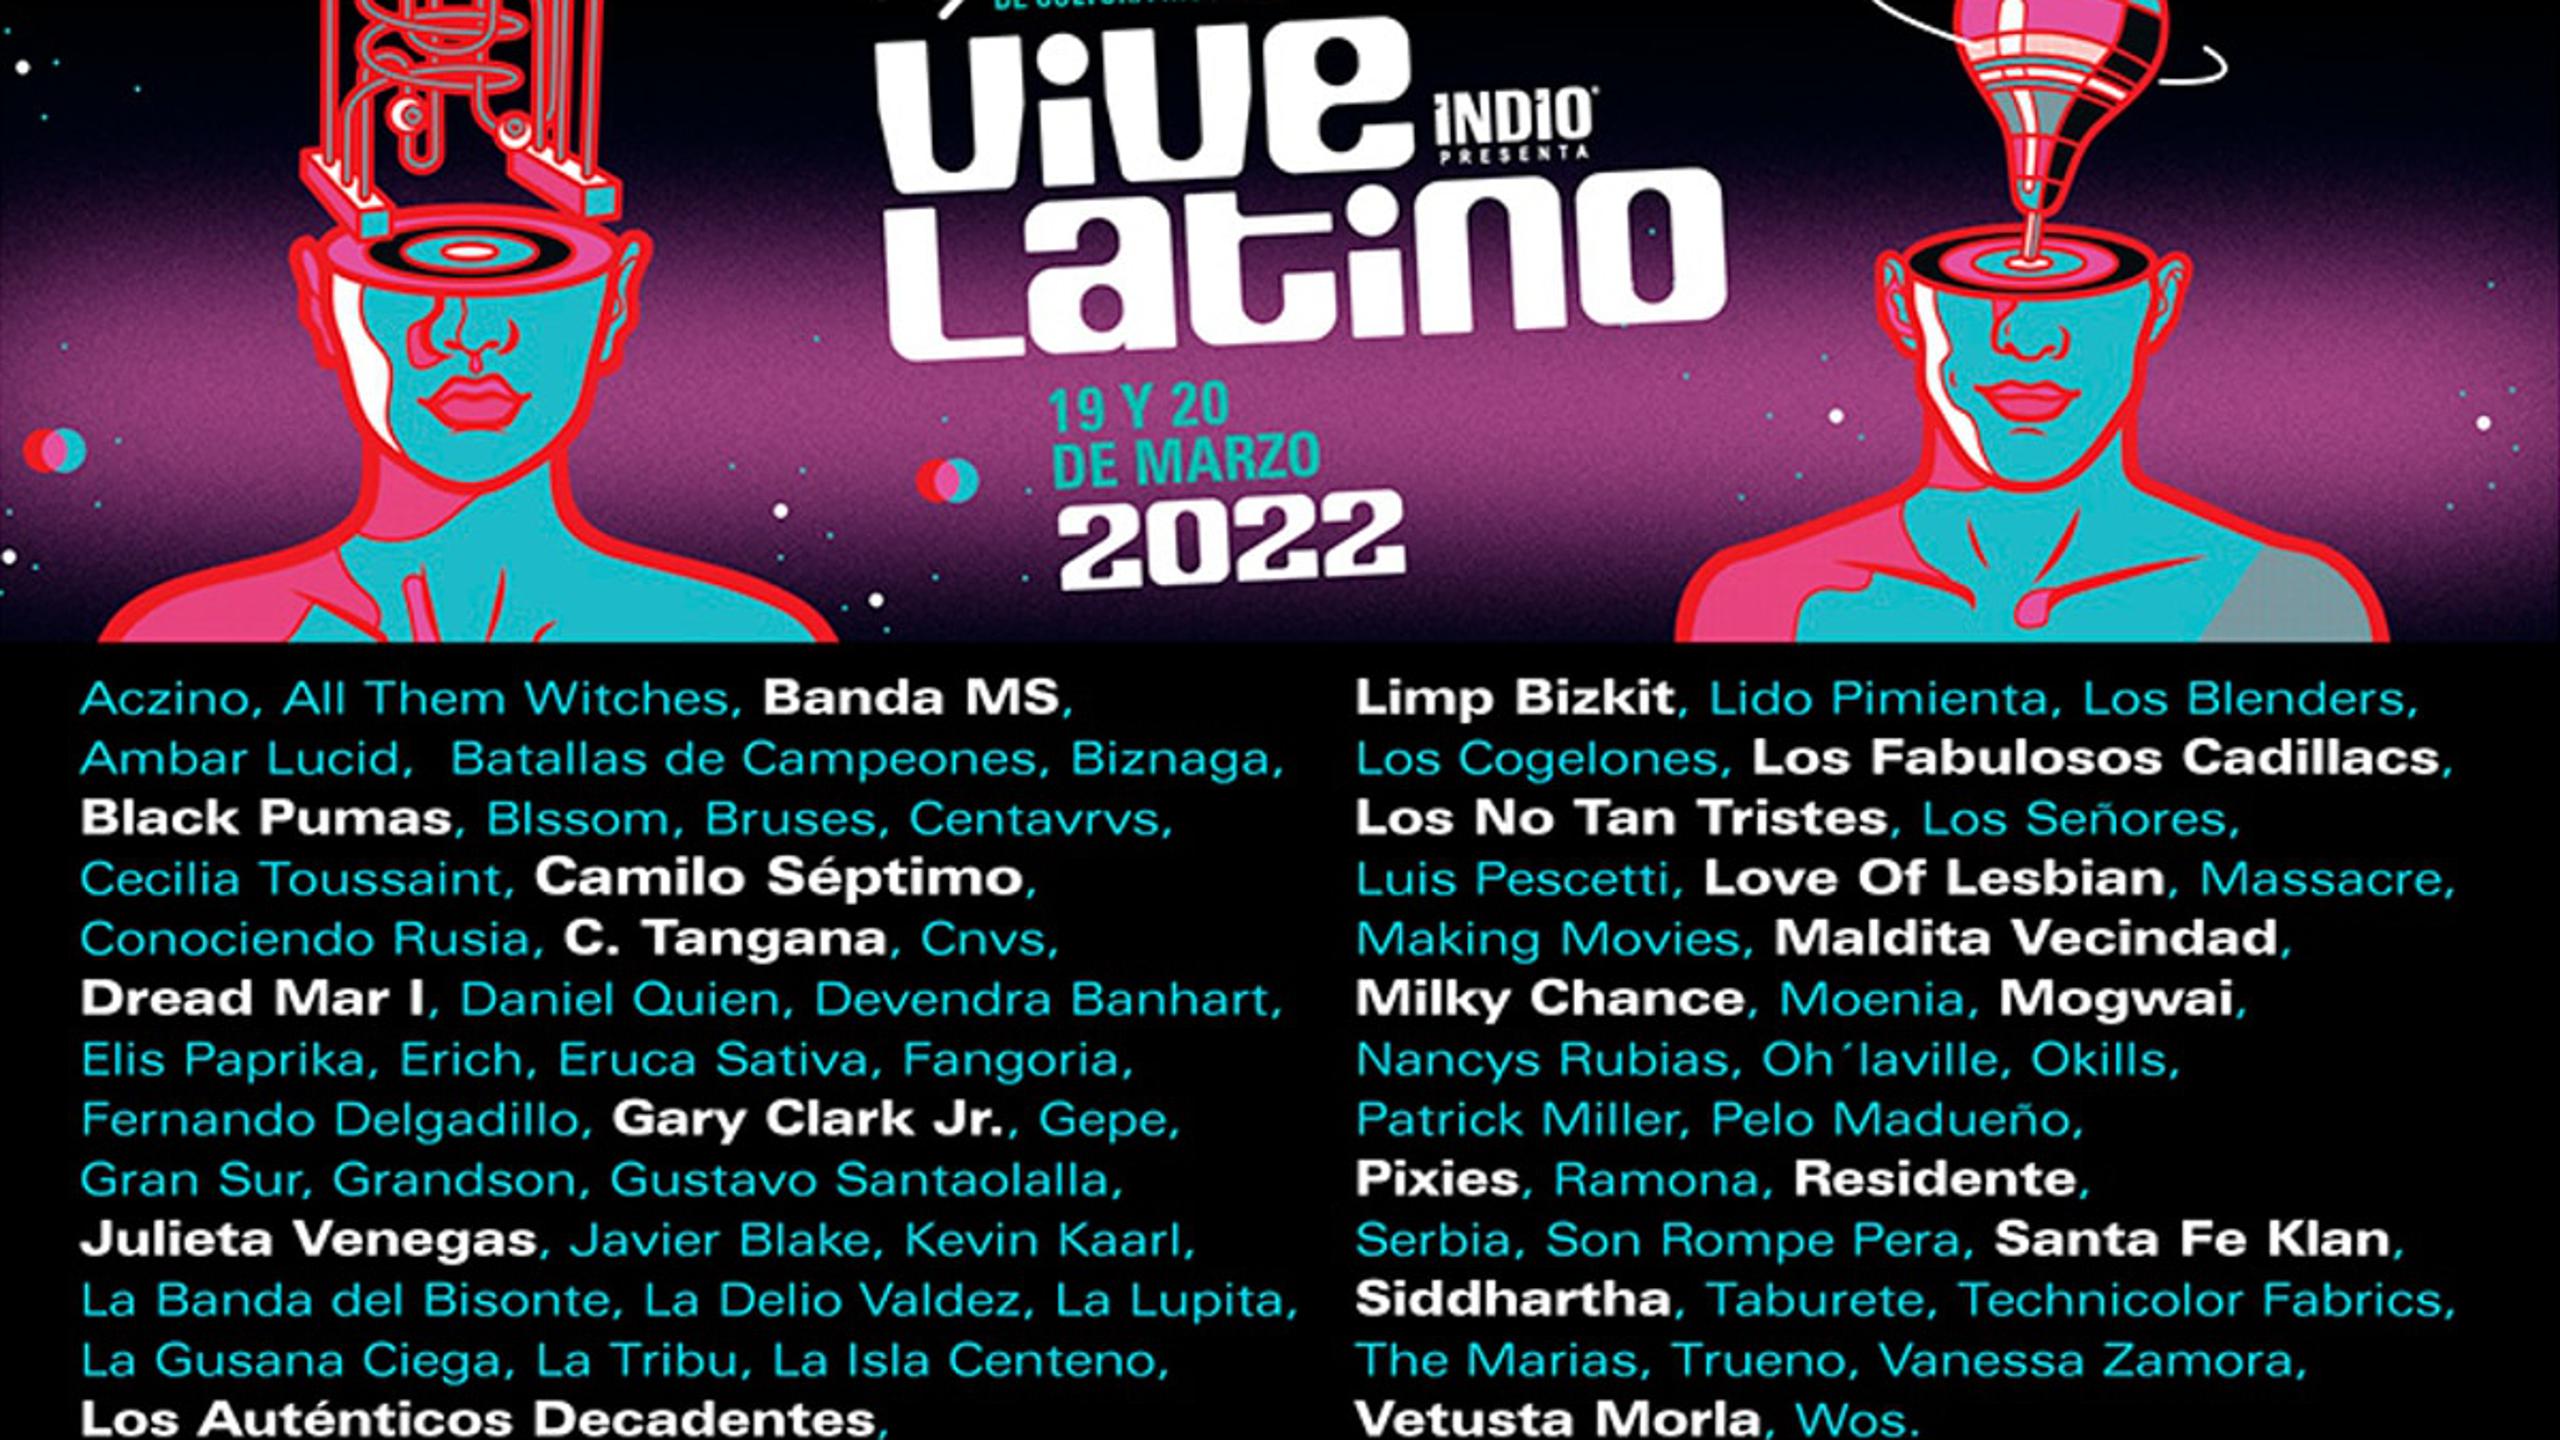 Vive Latino 2022. Tickets, lineup, bands for Vive Latino 2022 Wegow